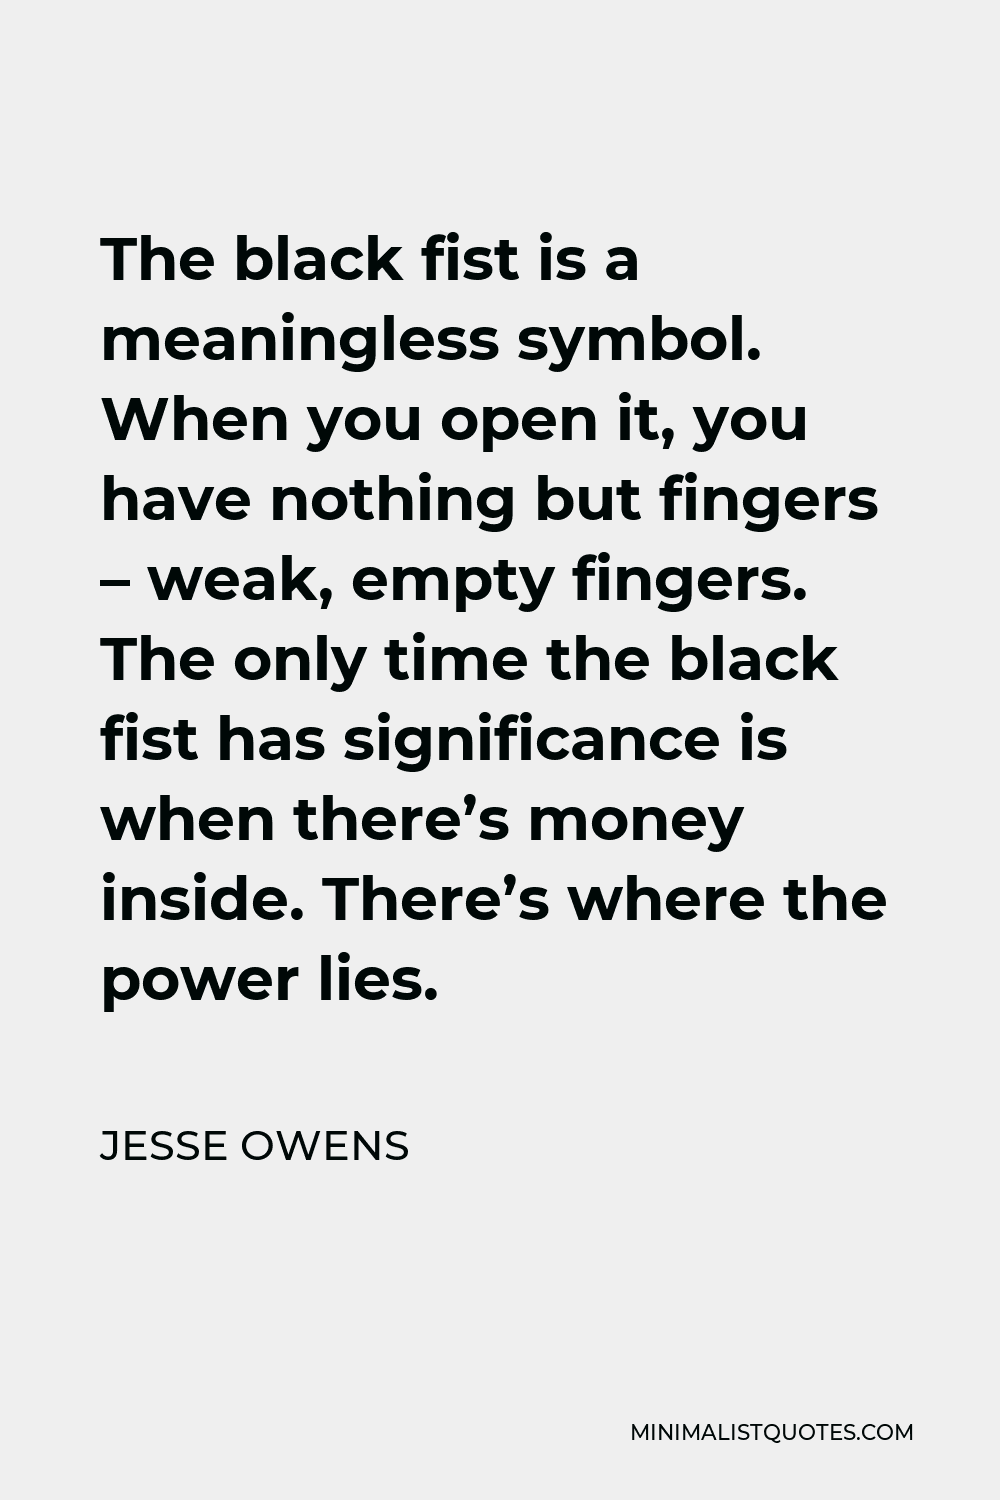 Jesse Owens Quote - The black fist is a meaningless symbol. When you open it, you have nothing but fingers – weak, empty fingers. The only time the black fist has significance is when there’s money inside. There’s where the power lies.